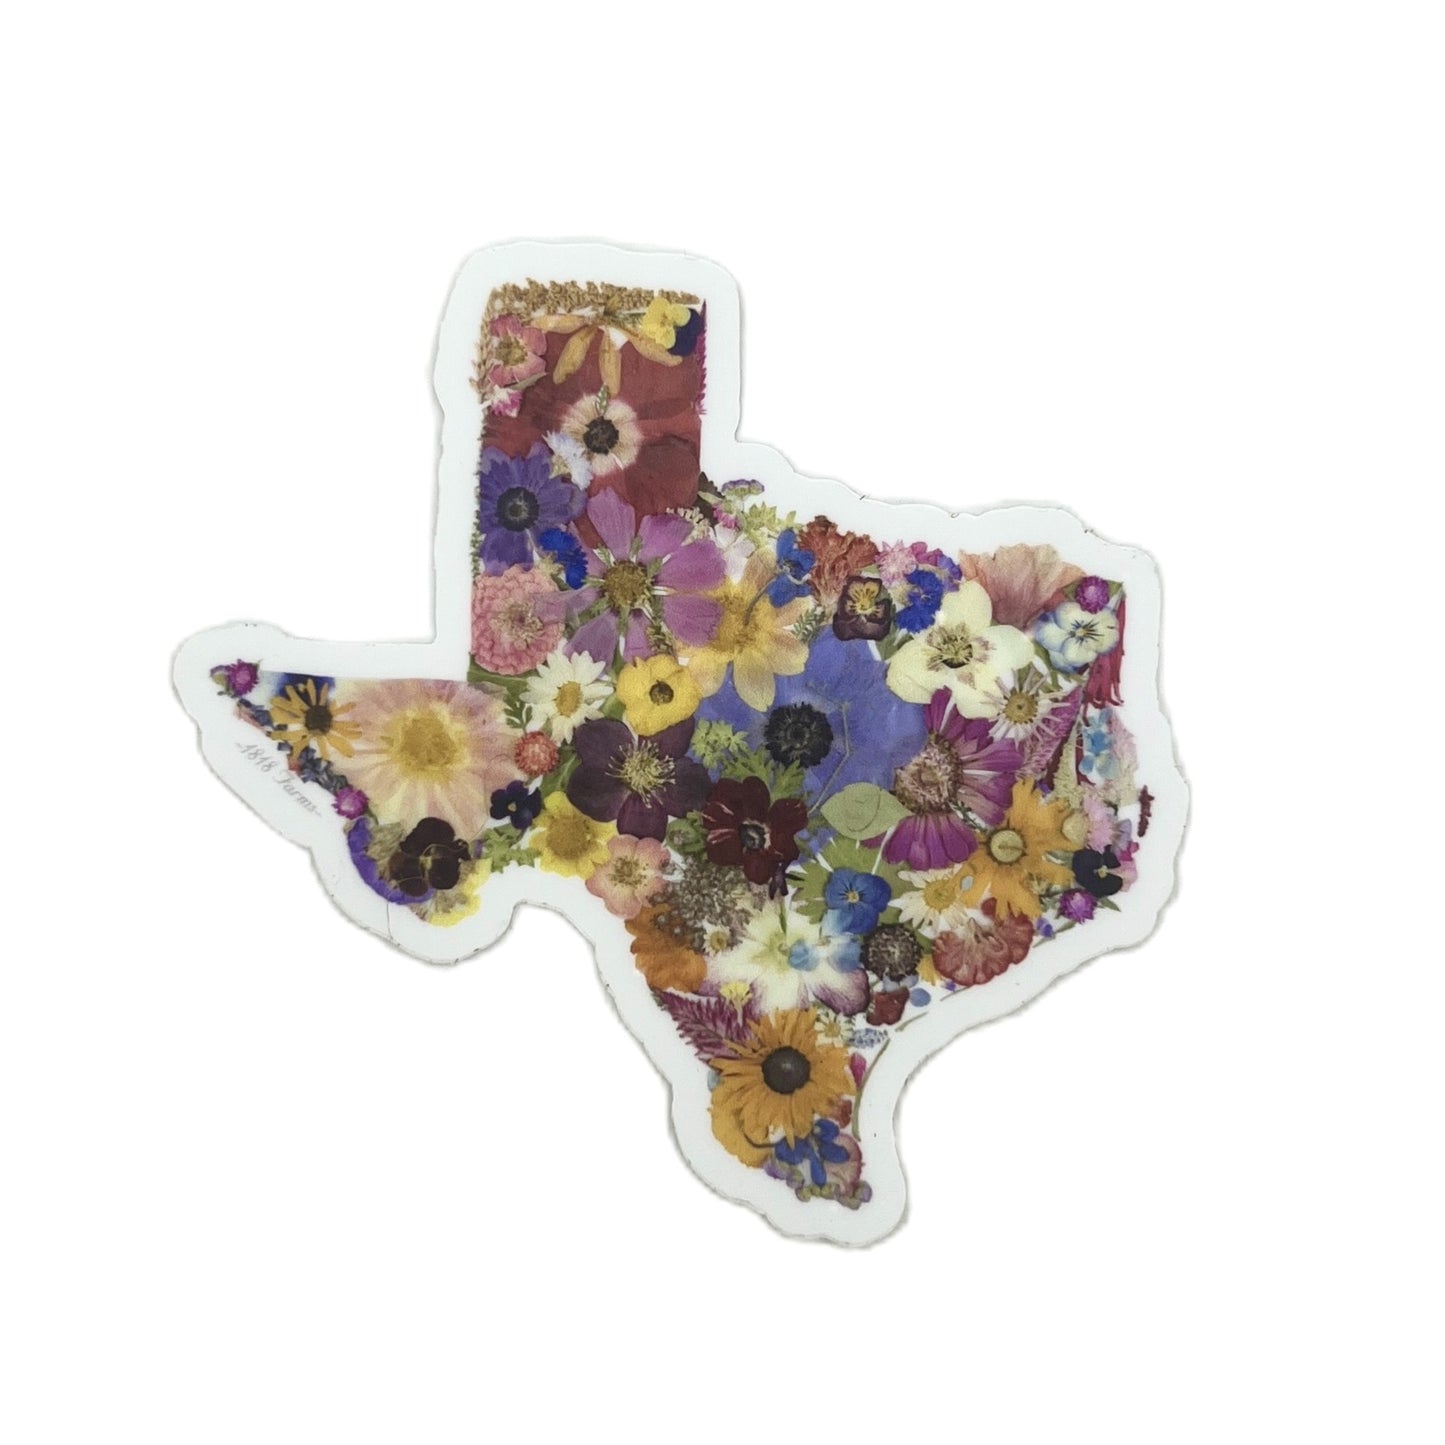 State Themed Vinyl Sticker Featuring Dried, Pressed Flowers - "Where I Bloom" Collection Vinyl Sticker 1818 Farms Texas  